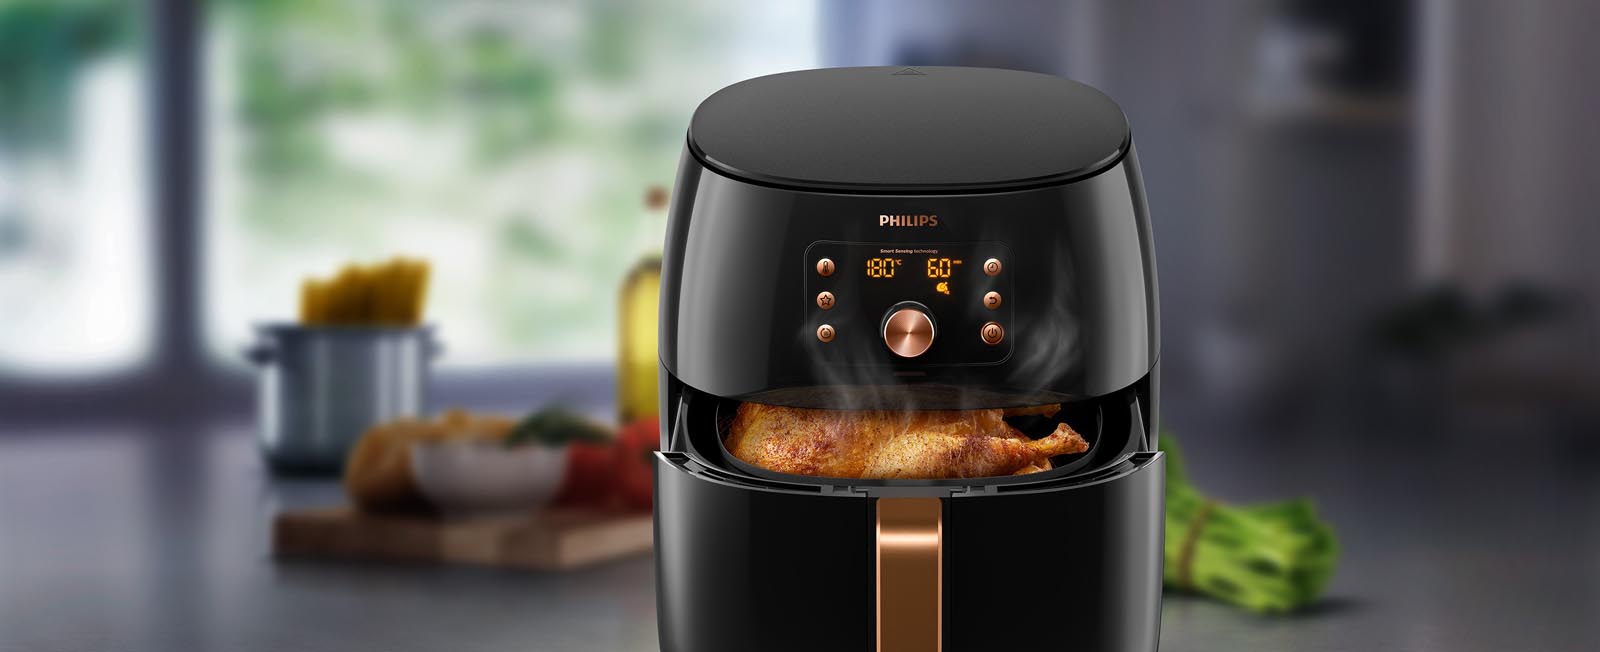 Philips Kitchen Appliance Put to The Test 